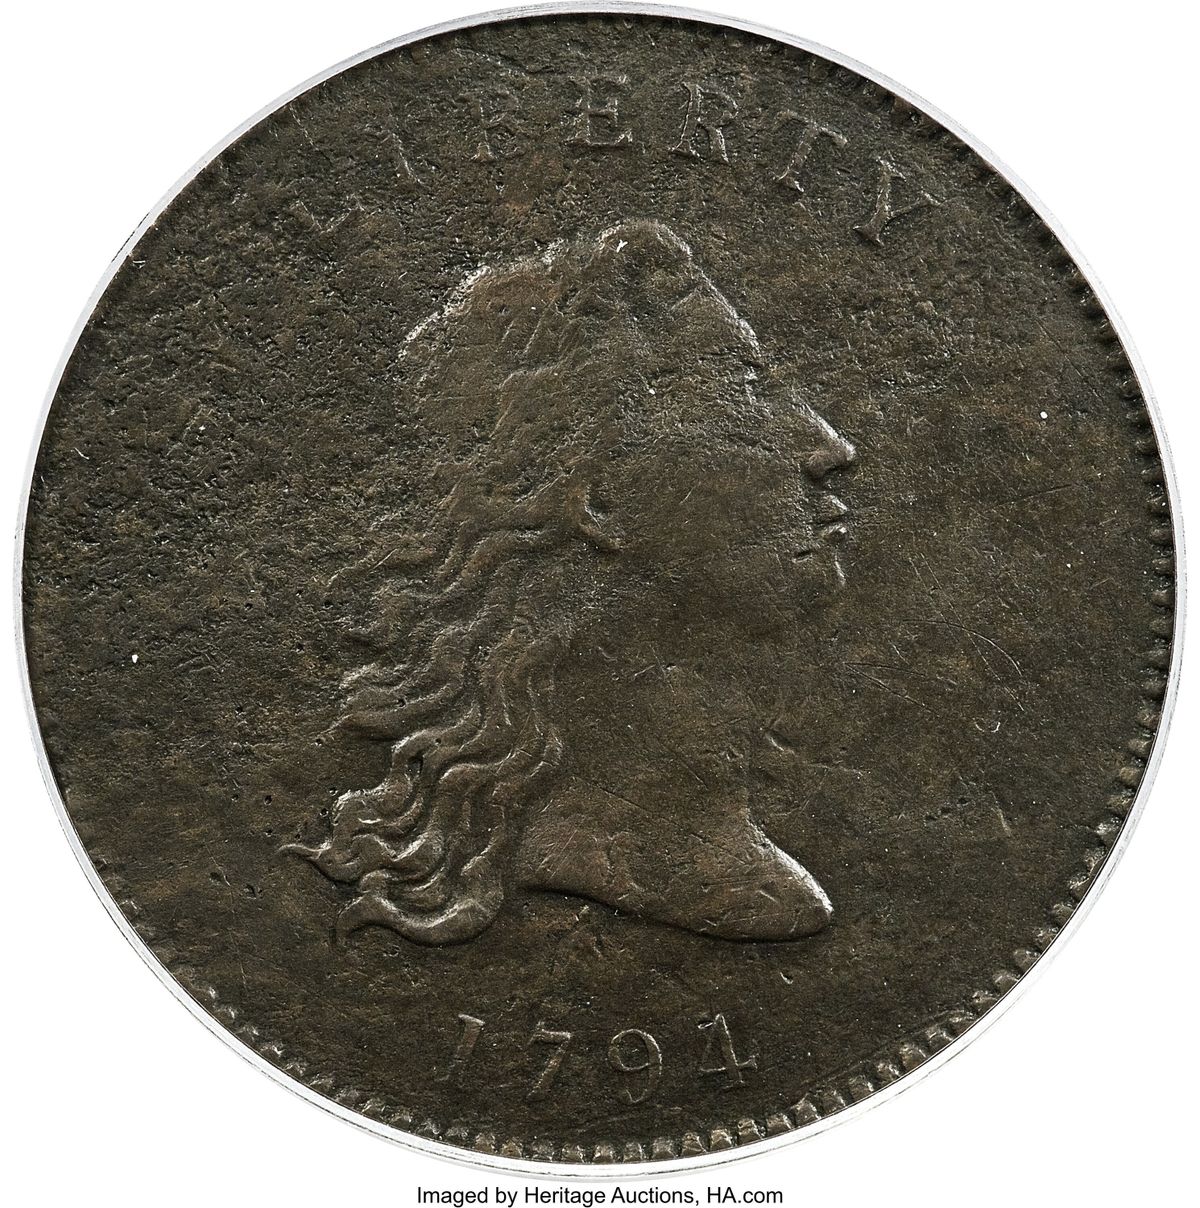 This undated photo provided by Heritage Auctions shows the front of a piece of copper that was struck by the U.S. Mint in Philadelphia in 1794 and was a prototype for the fledgling nation’s money. The item, which is known as the “No Stars Flowing Hair Dollar,” is owned by businessman and Texas Rangers co-chairman Bob Simpson and will go up for auction at Heritage Auctions in Dallas on Friday, April 23, 2021.  (Emily Clements)